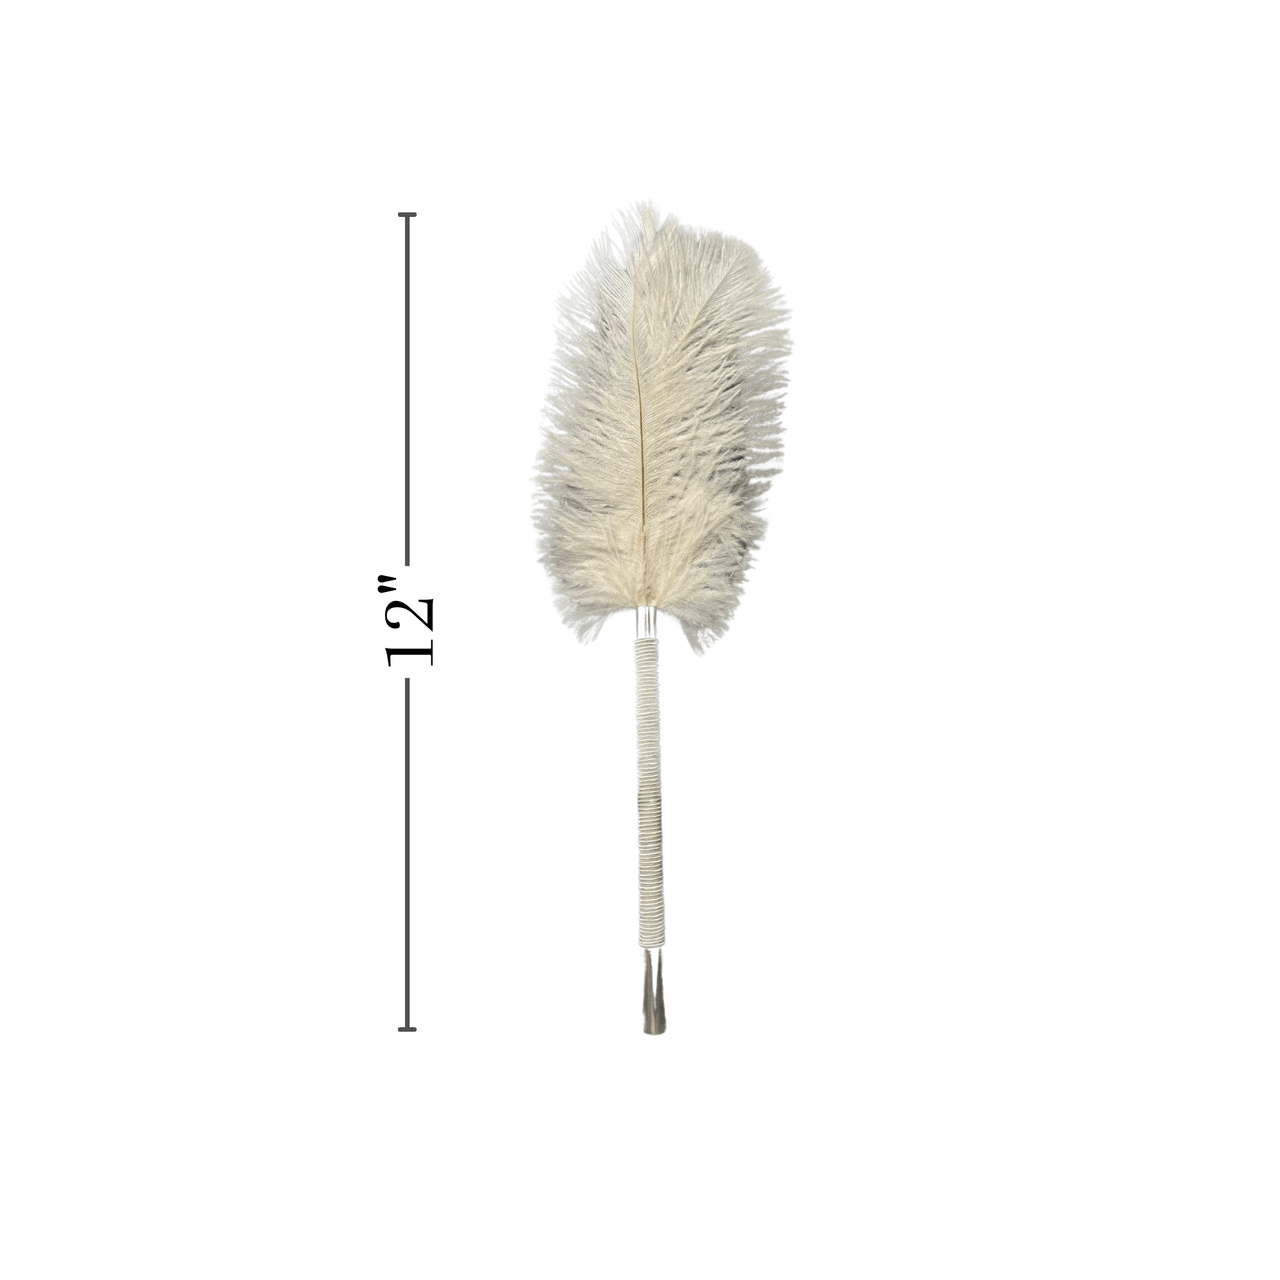 Luxurious Teasing Feather Tickler - Sensory Play Accessory with Soft Plumes & Elegant Handle